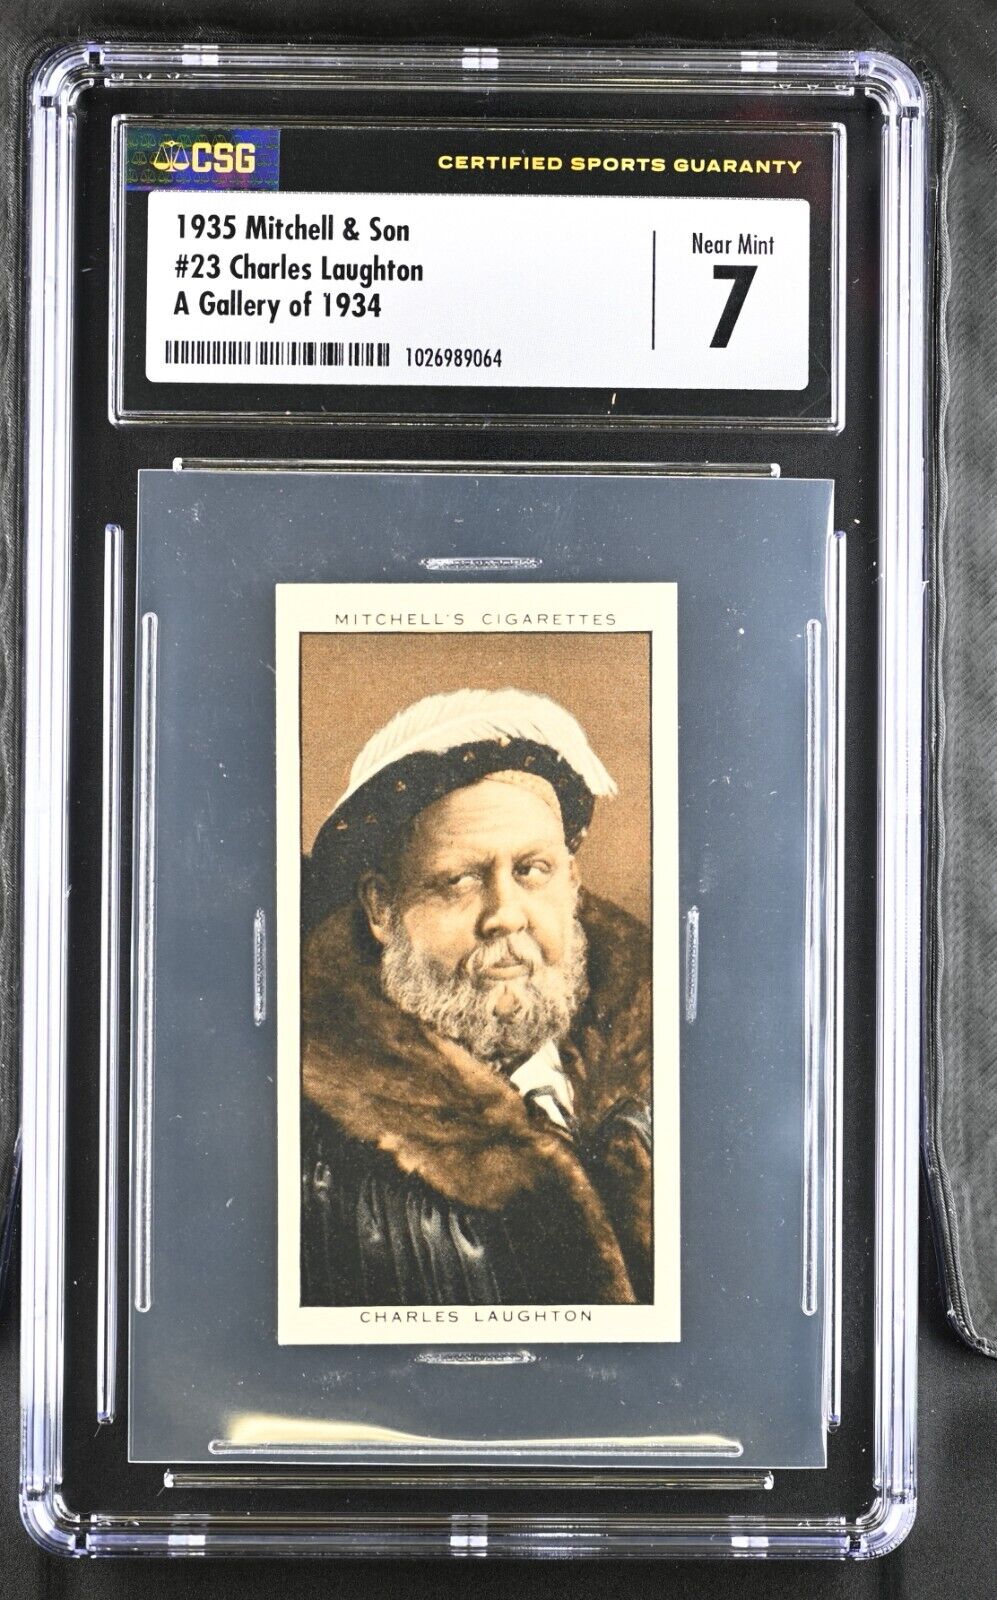 1935 Mitchell & Son Gallery of 1934 #23 CHARLES LAUGHTON  CSG 7 NM